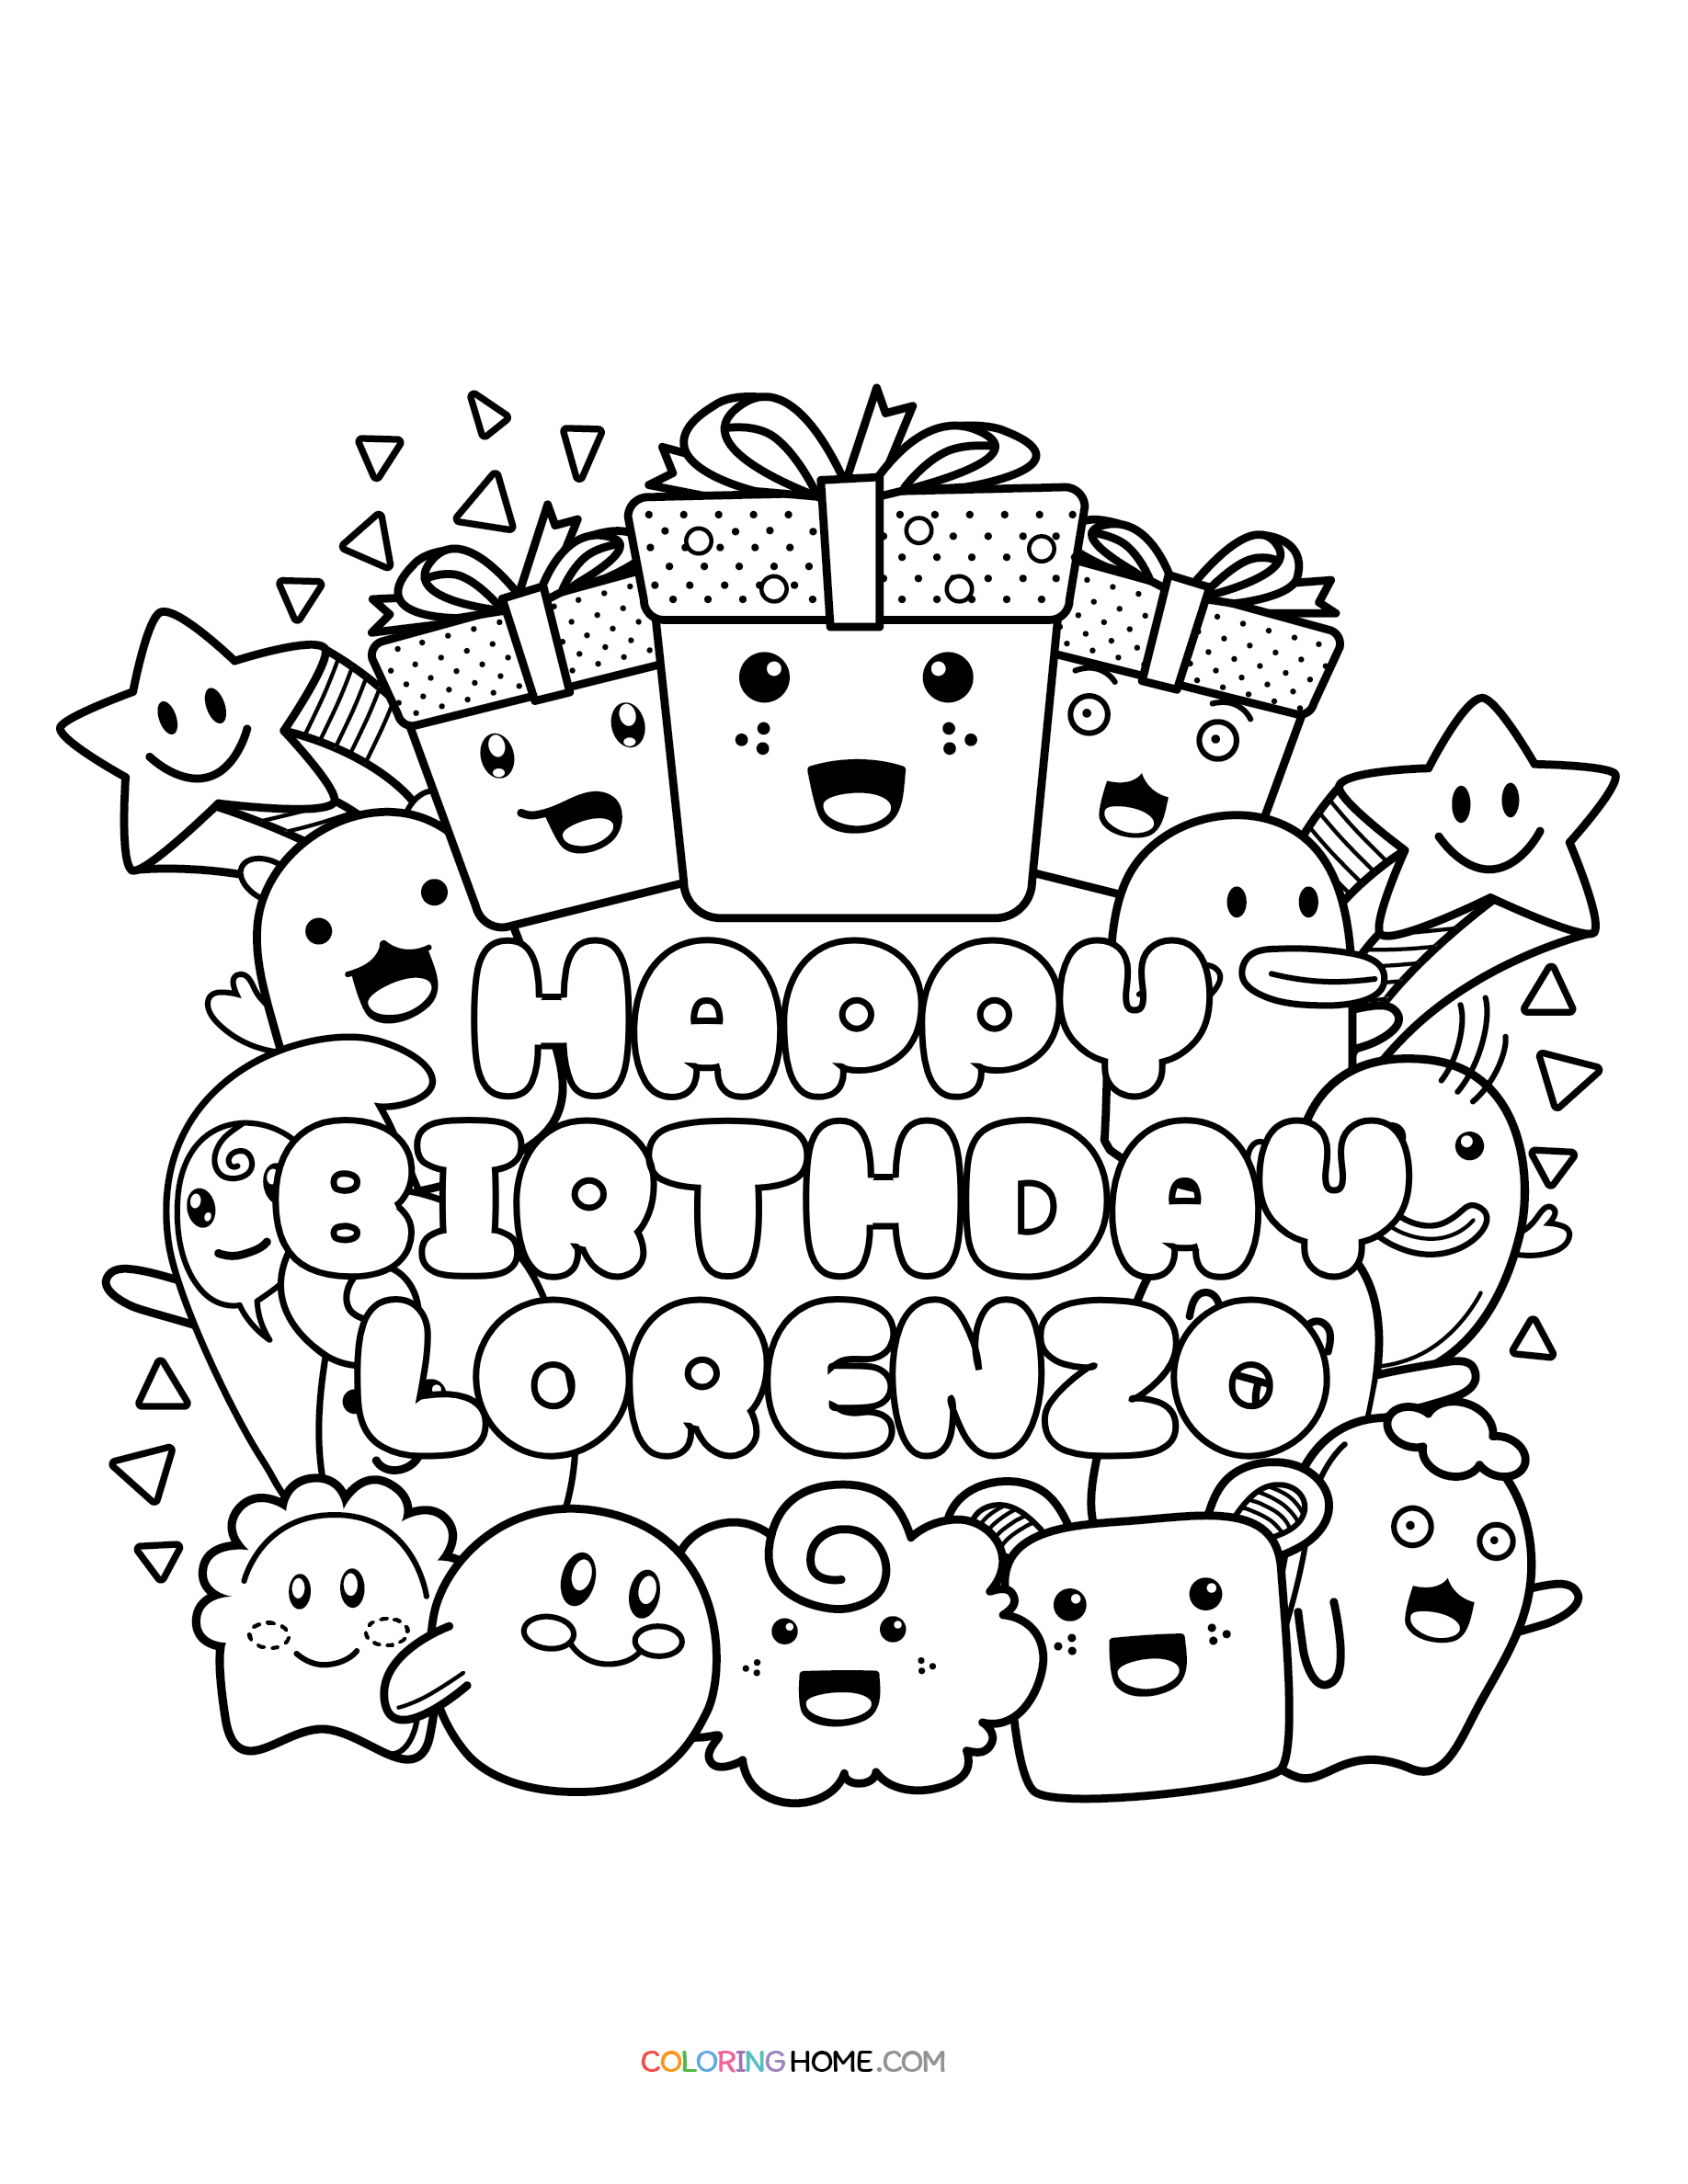 Happy Birthday Lorenzo Coloring Page - Coloring Home